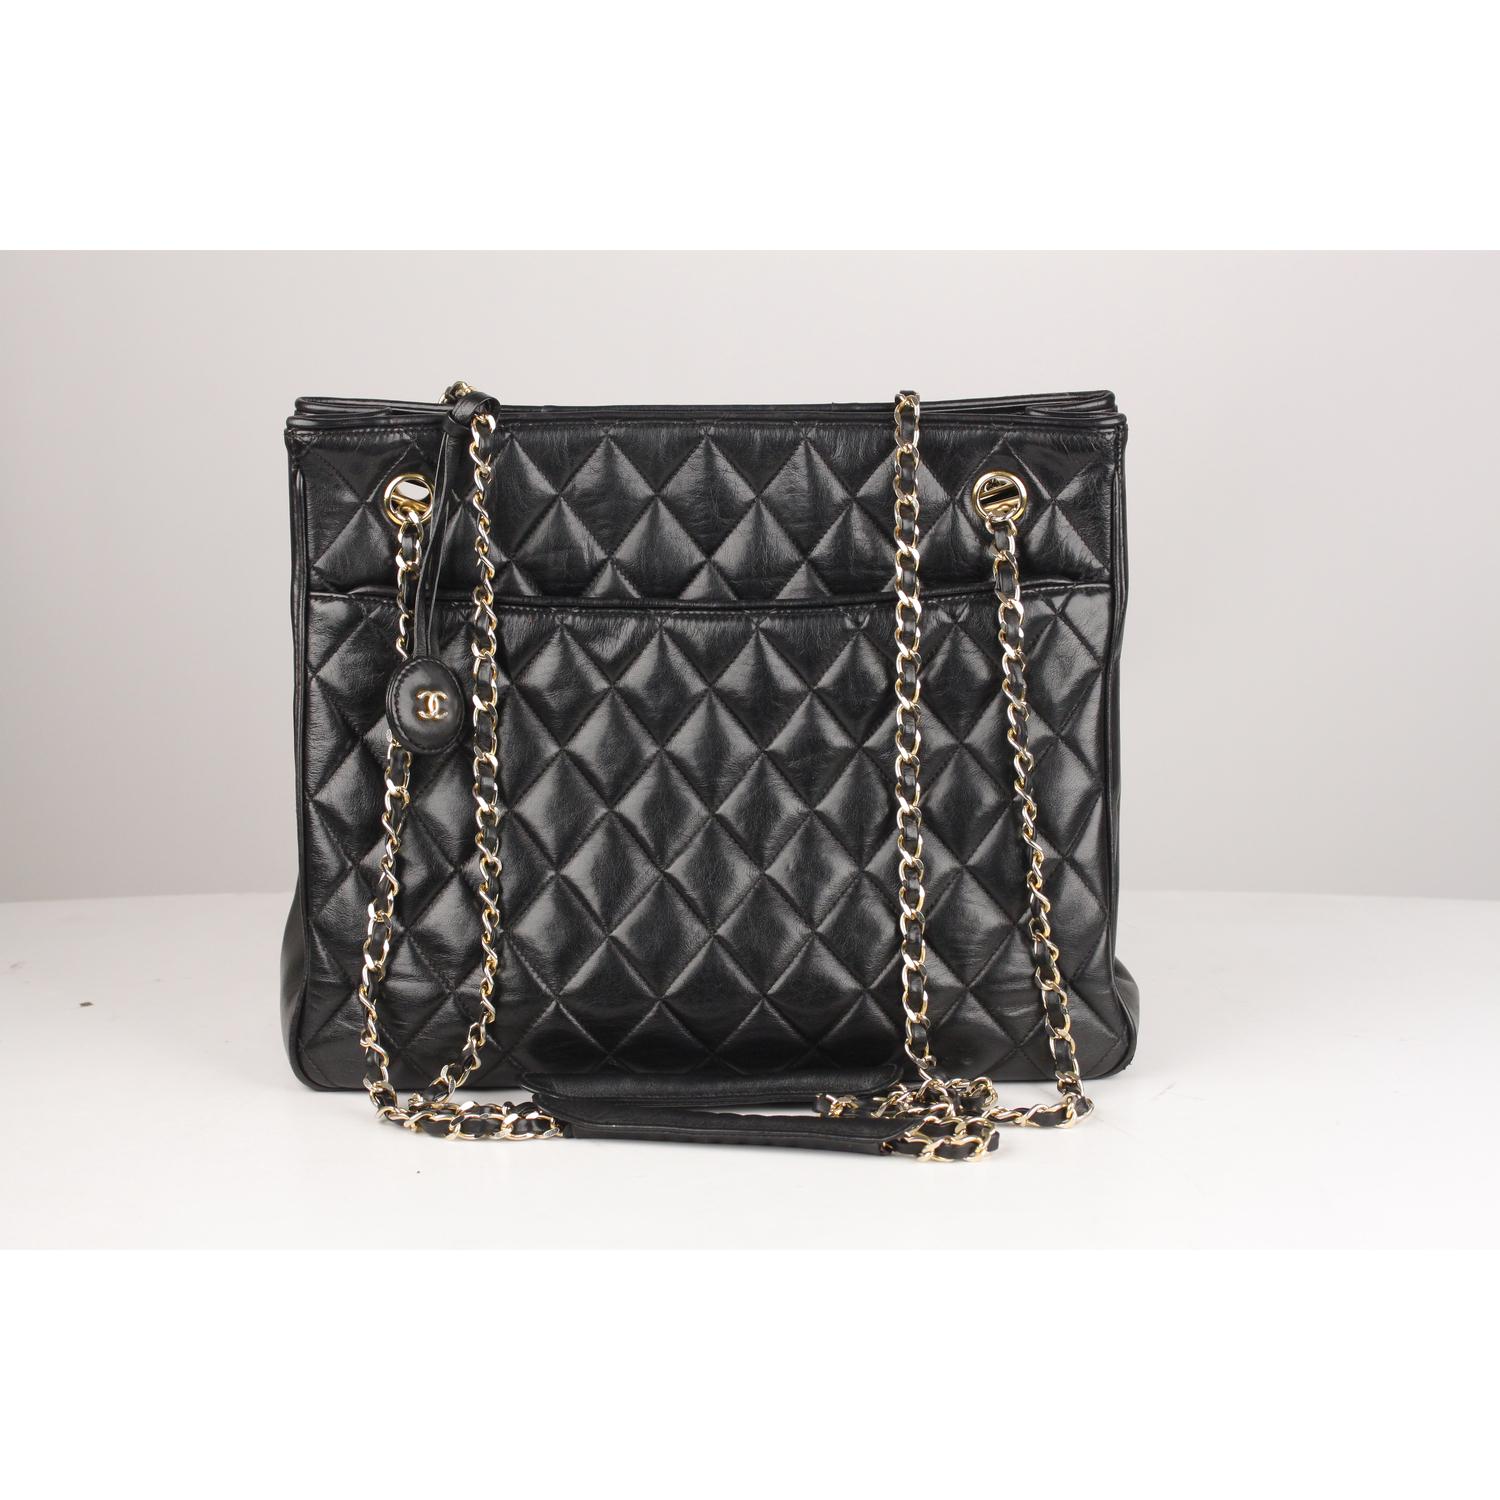 This bag will come with a Certificate of Authenticity provided by Entrupy, at no further cost.

- Beautiful vintage CHANEL that appears to be from early 80s 
- Made of black lambskin quilted leather 
- Large outer pocket on the front and on the